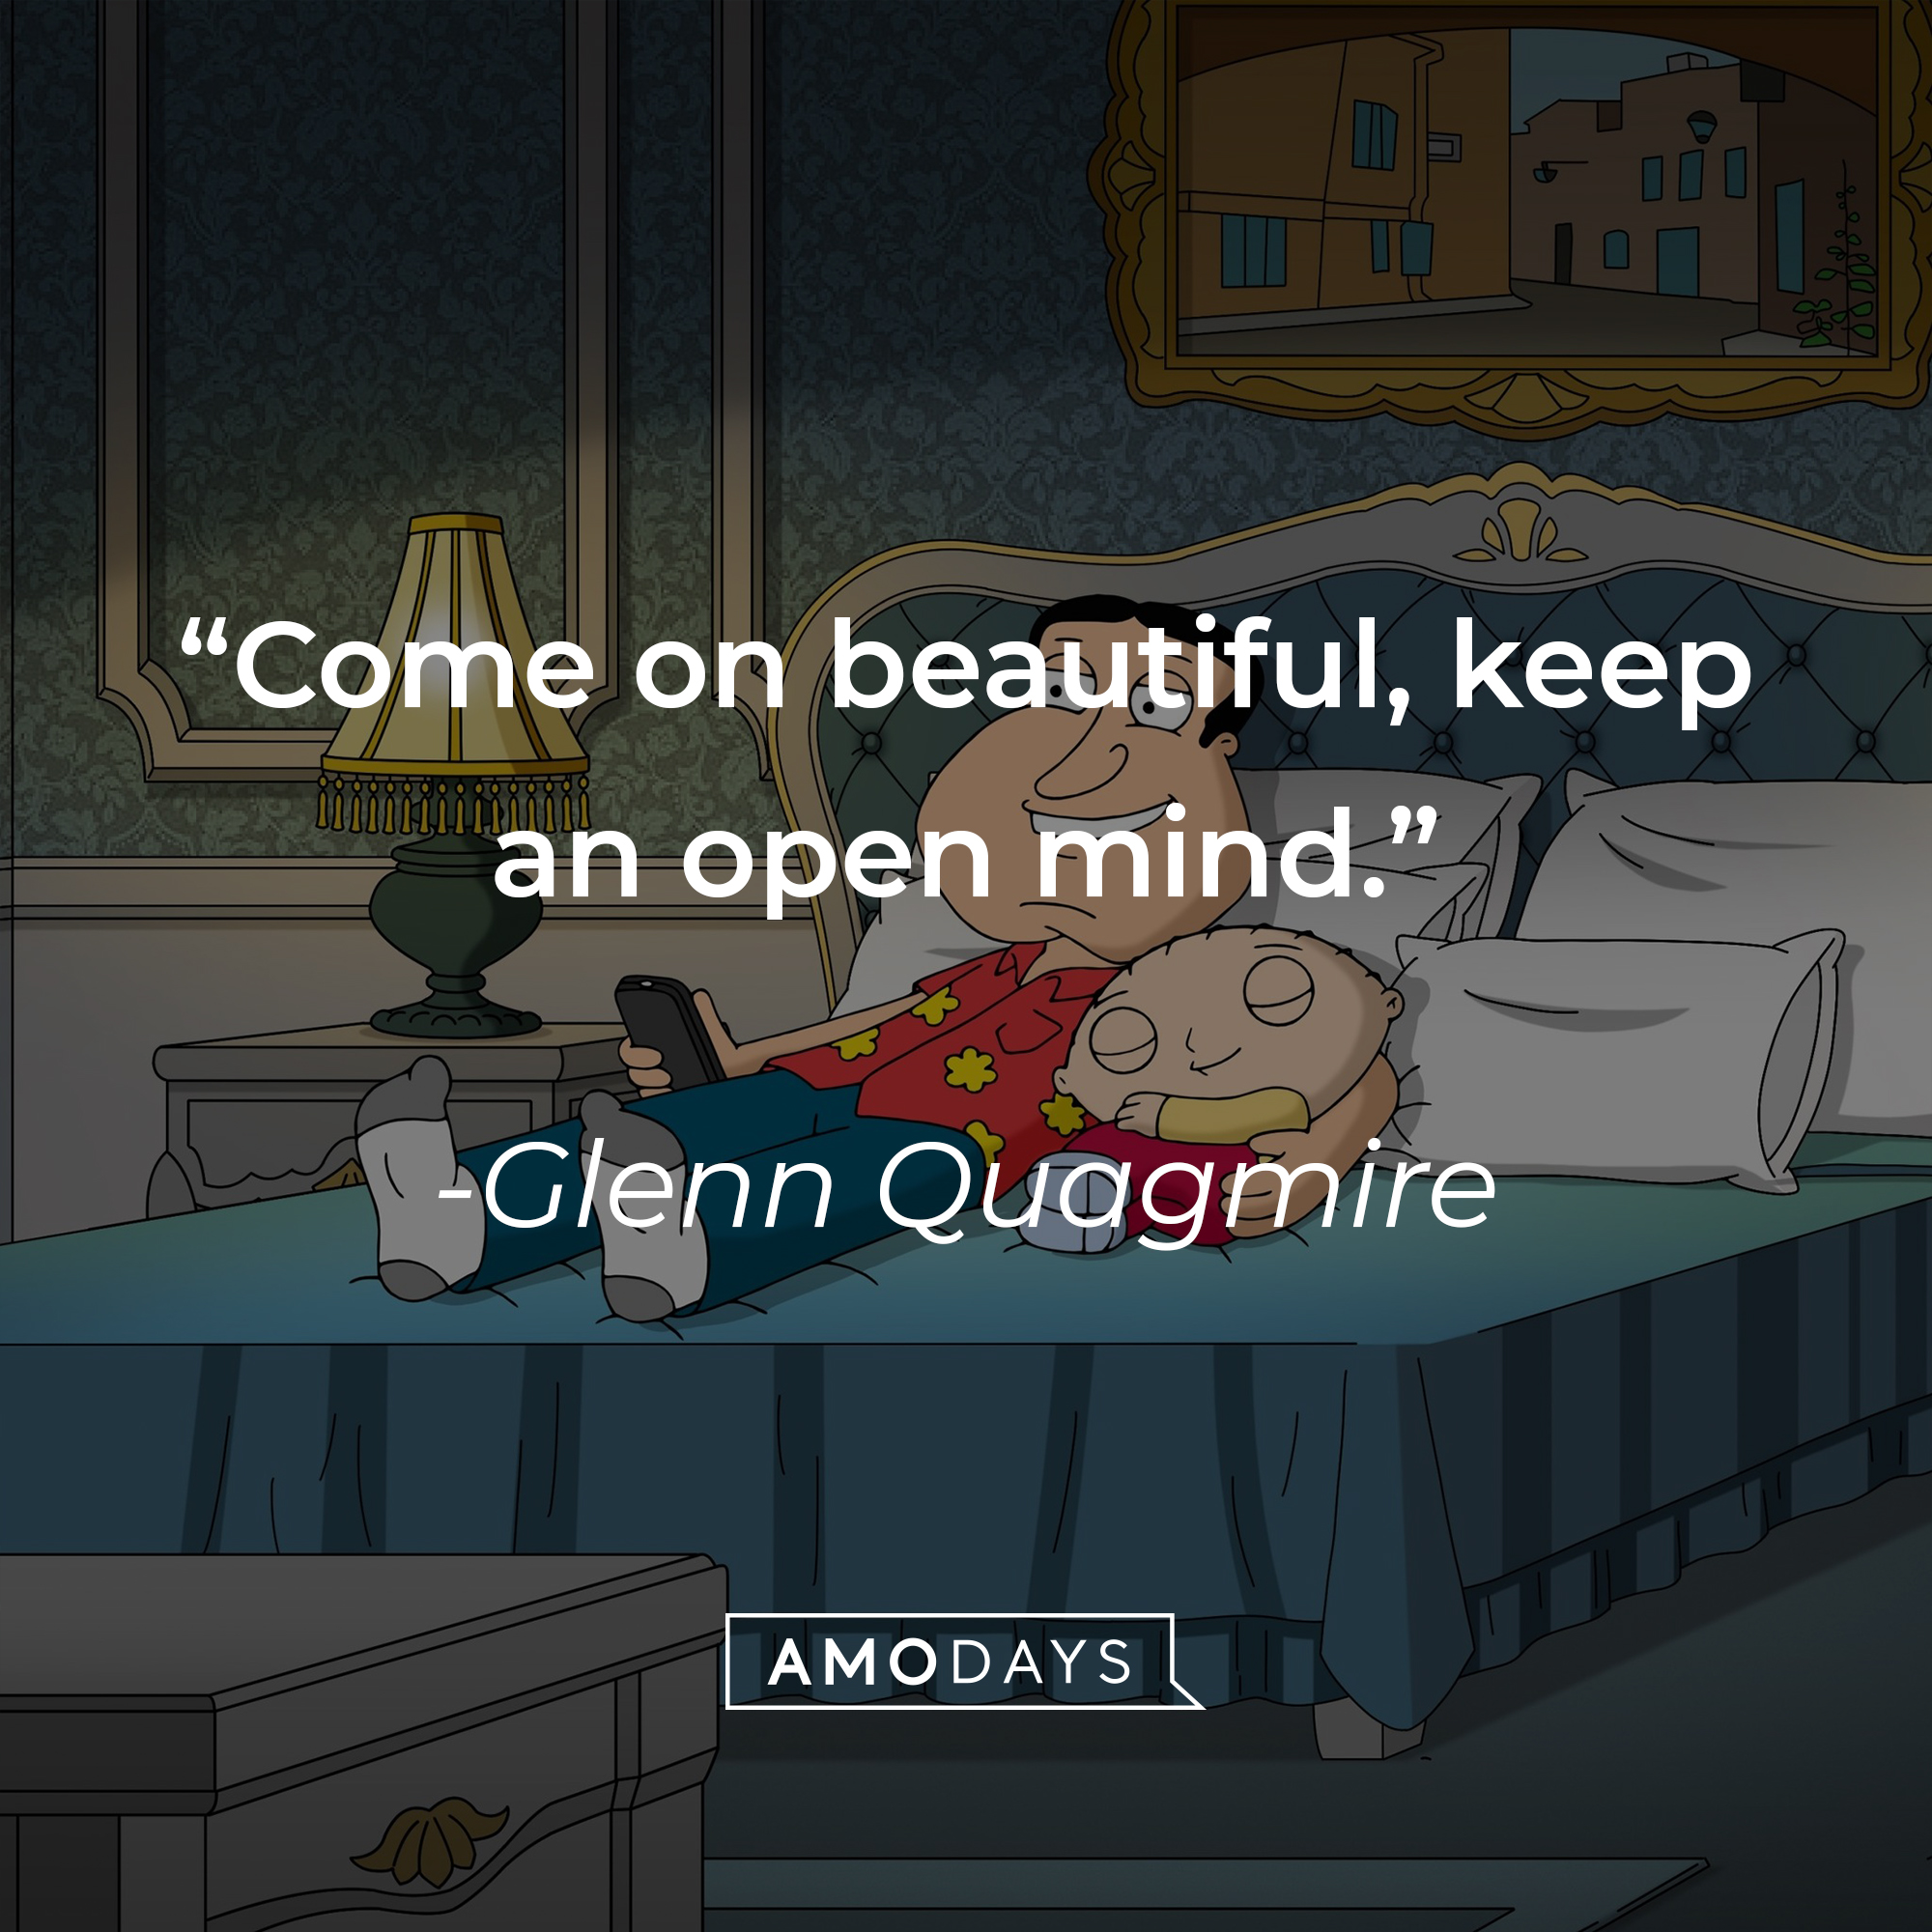 Glenn Quagmire with another character from “Family Guy” and  his quote: “Come on beautiful, keep an open mind.” | Source: facebook.com/FamilyGuy